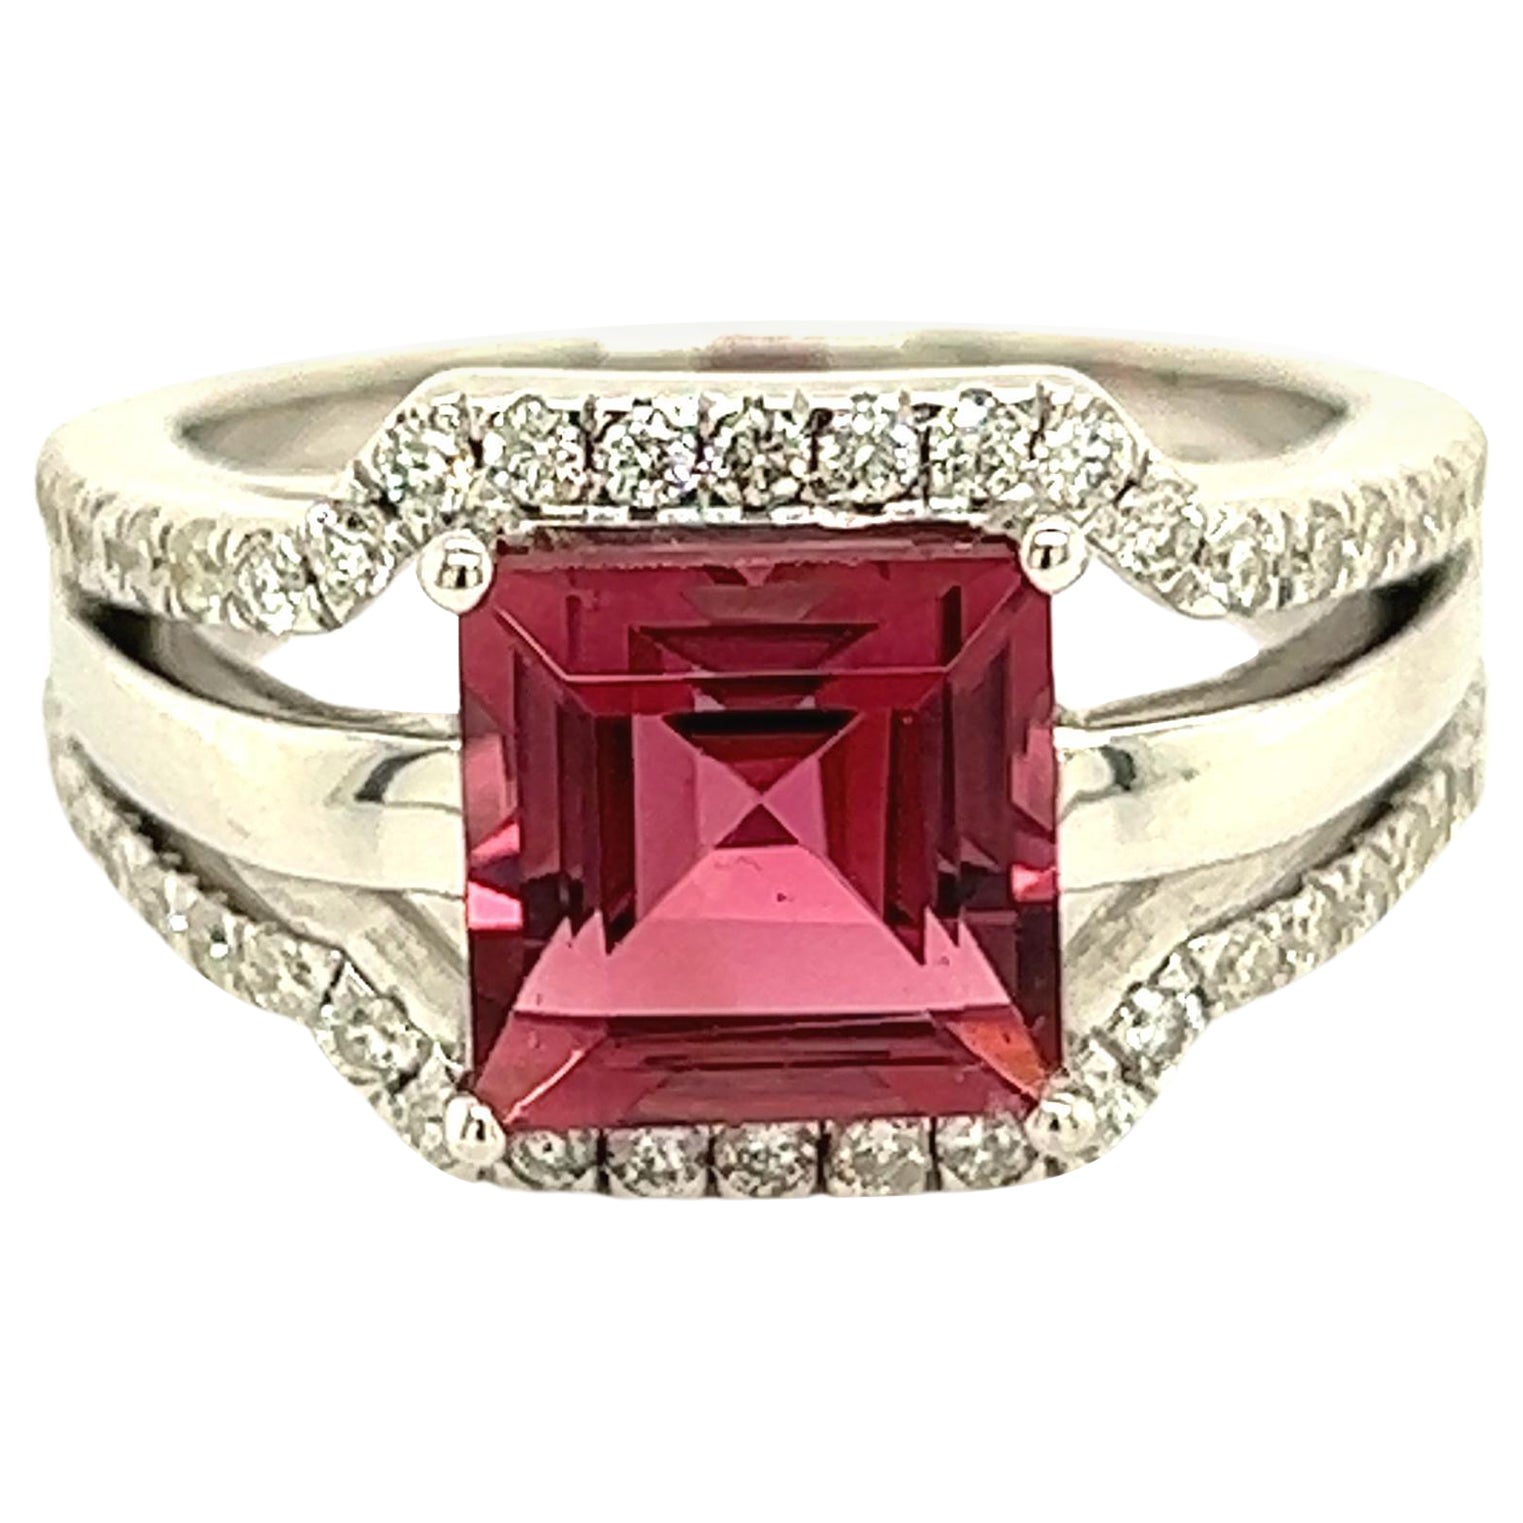 Natural Tourmaline Diamond Ring Size 6.5 14k W Gold 3.24 TCW Certified For Sale